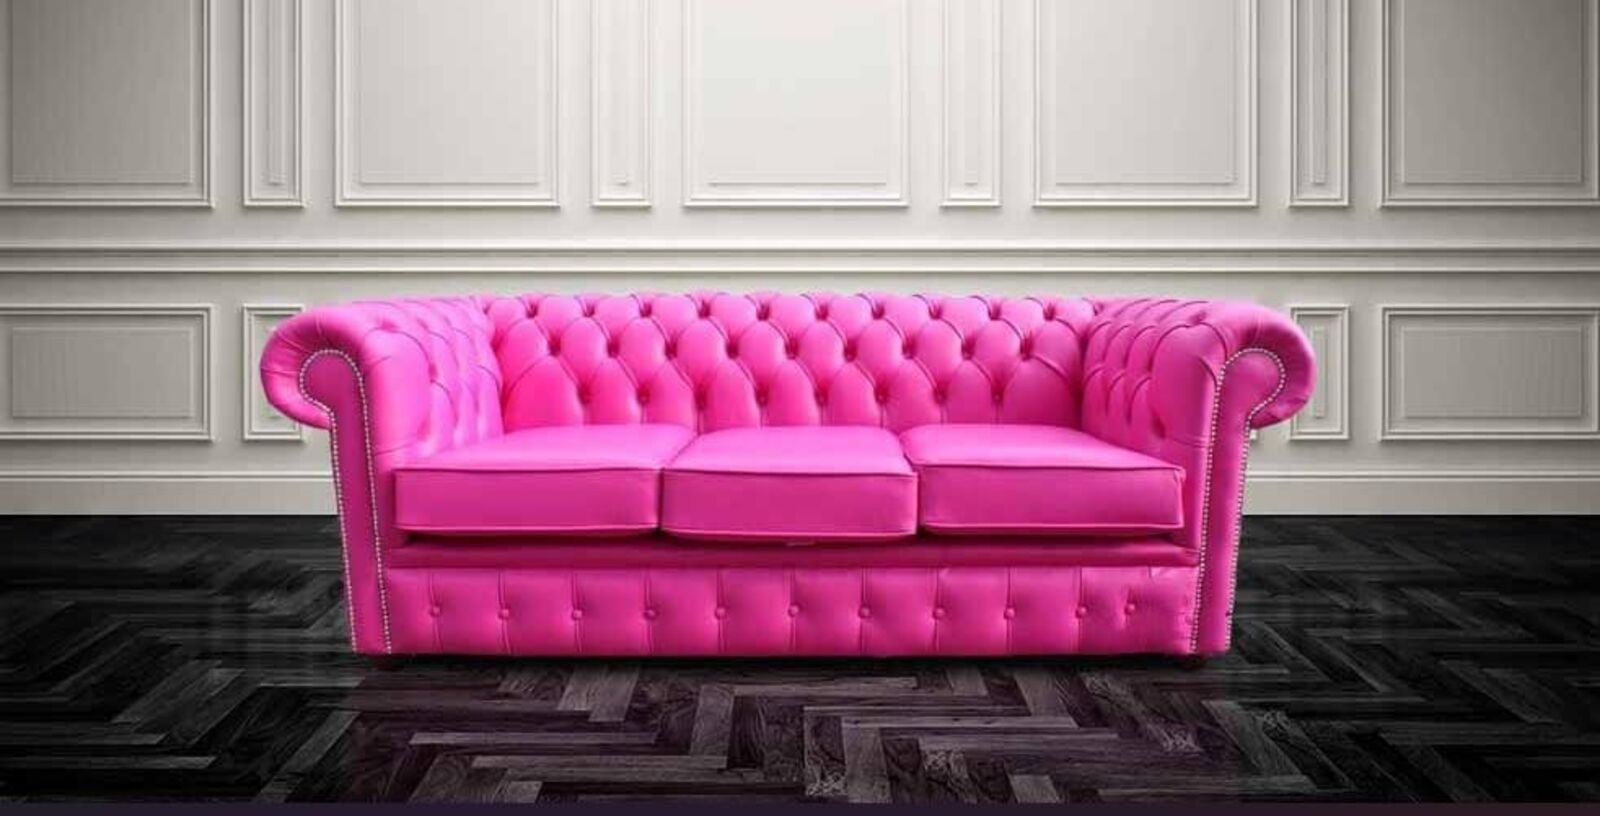 Product photograph of Chesterfield 3 Seater Sofa Settee Fuschsia Pink Leather Sofa Offer from Designer Sofas 4U